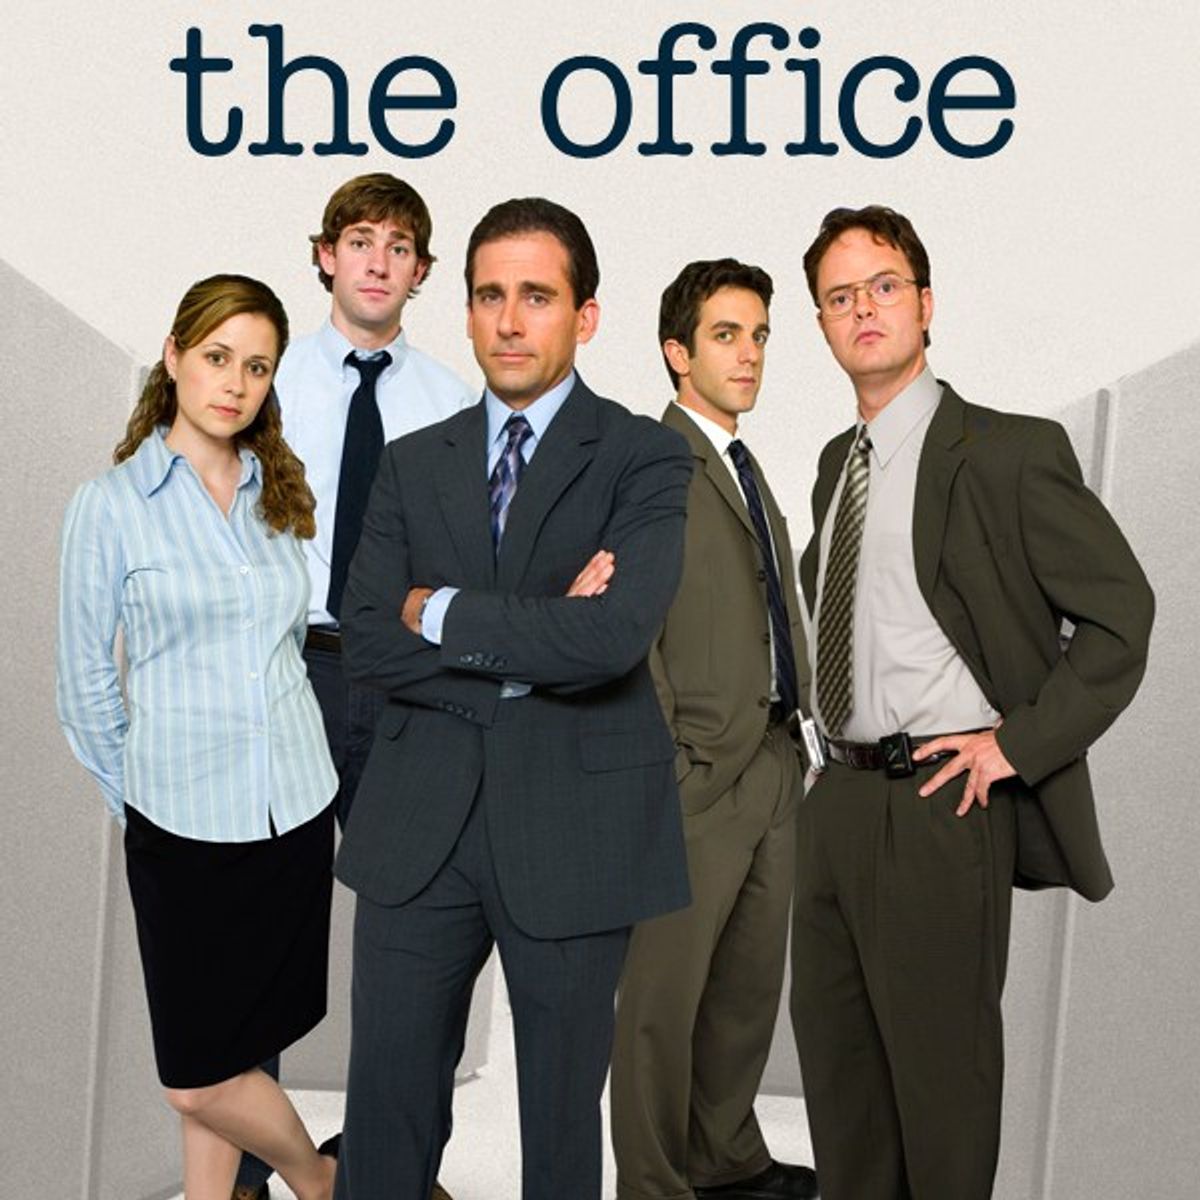 10 Reasons To Love "The Office"